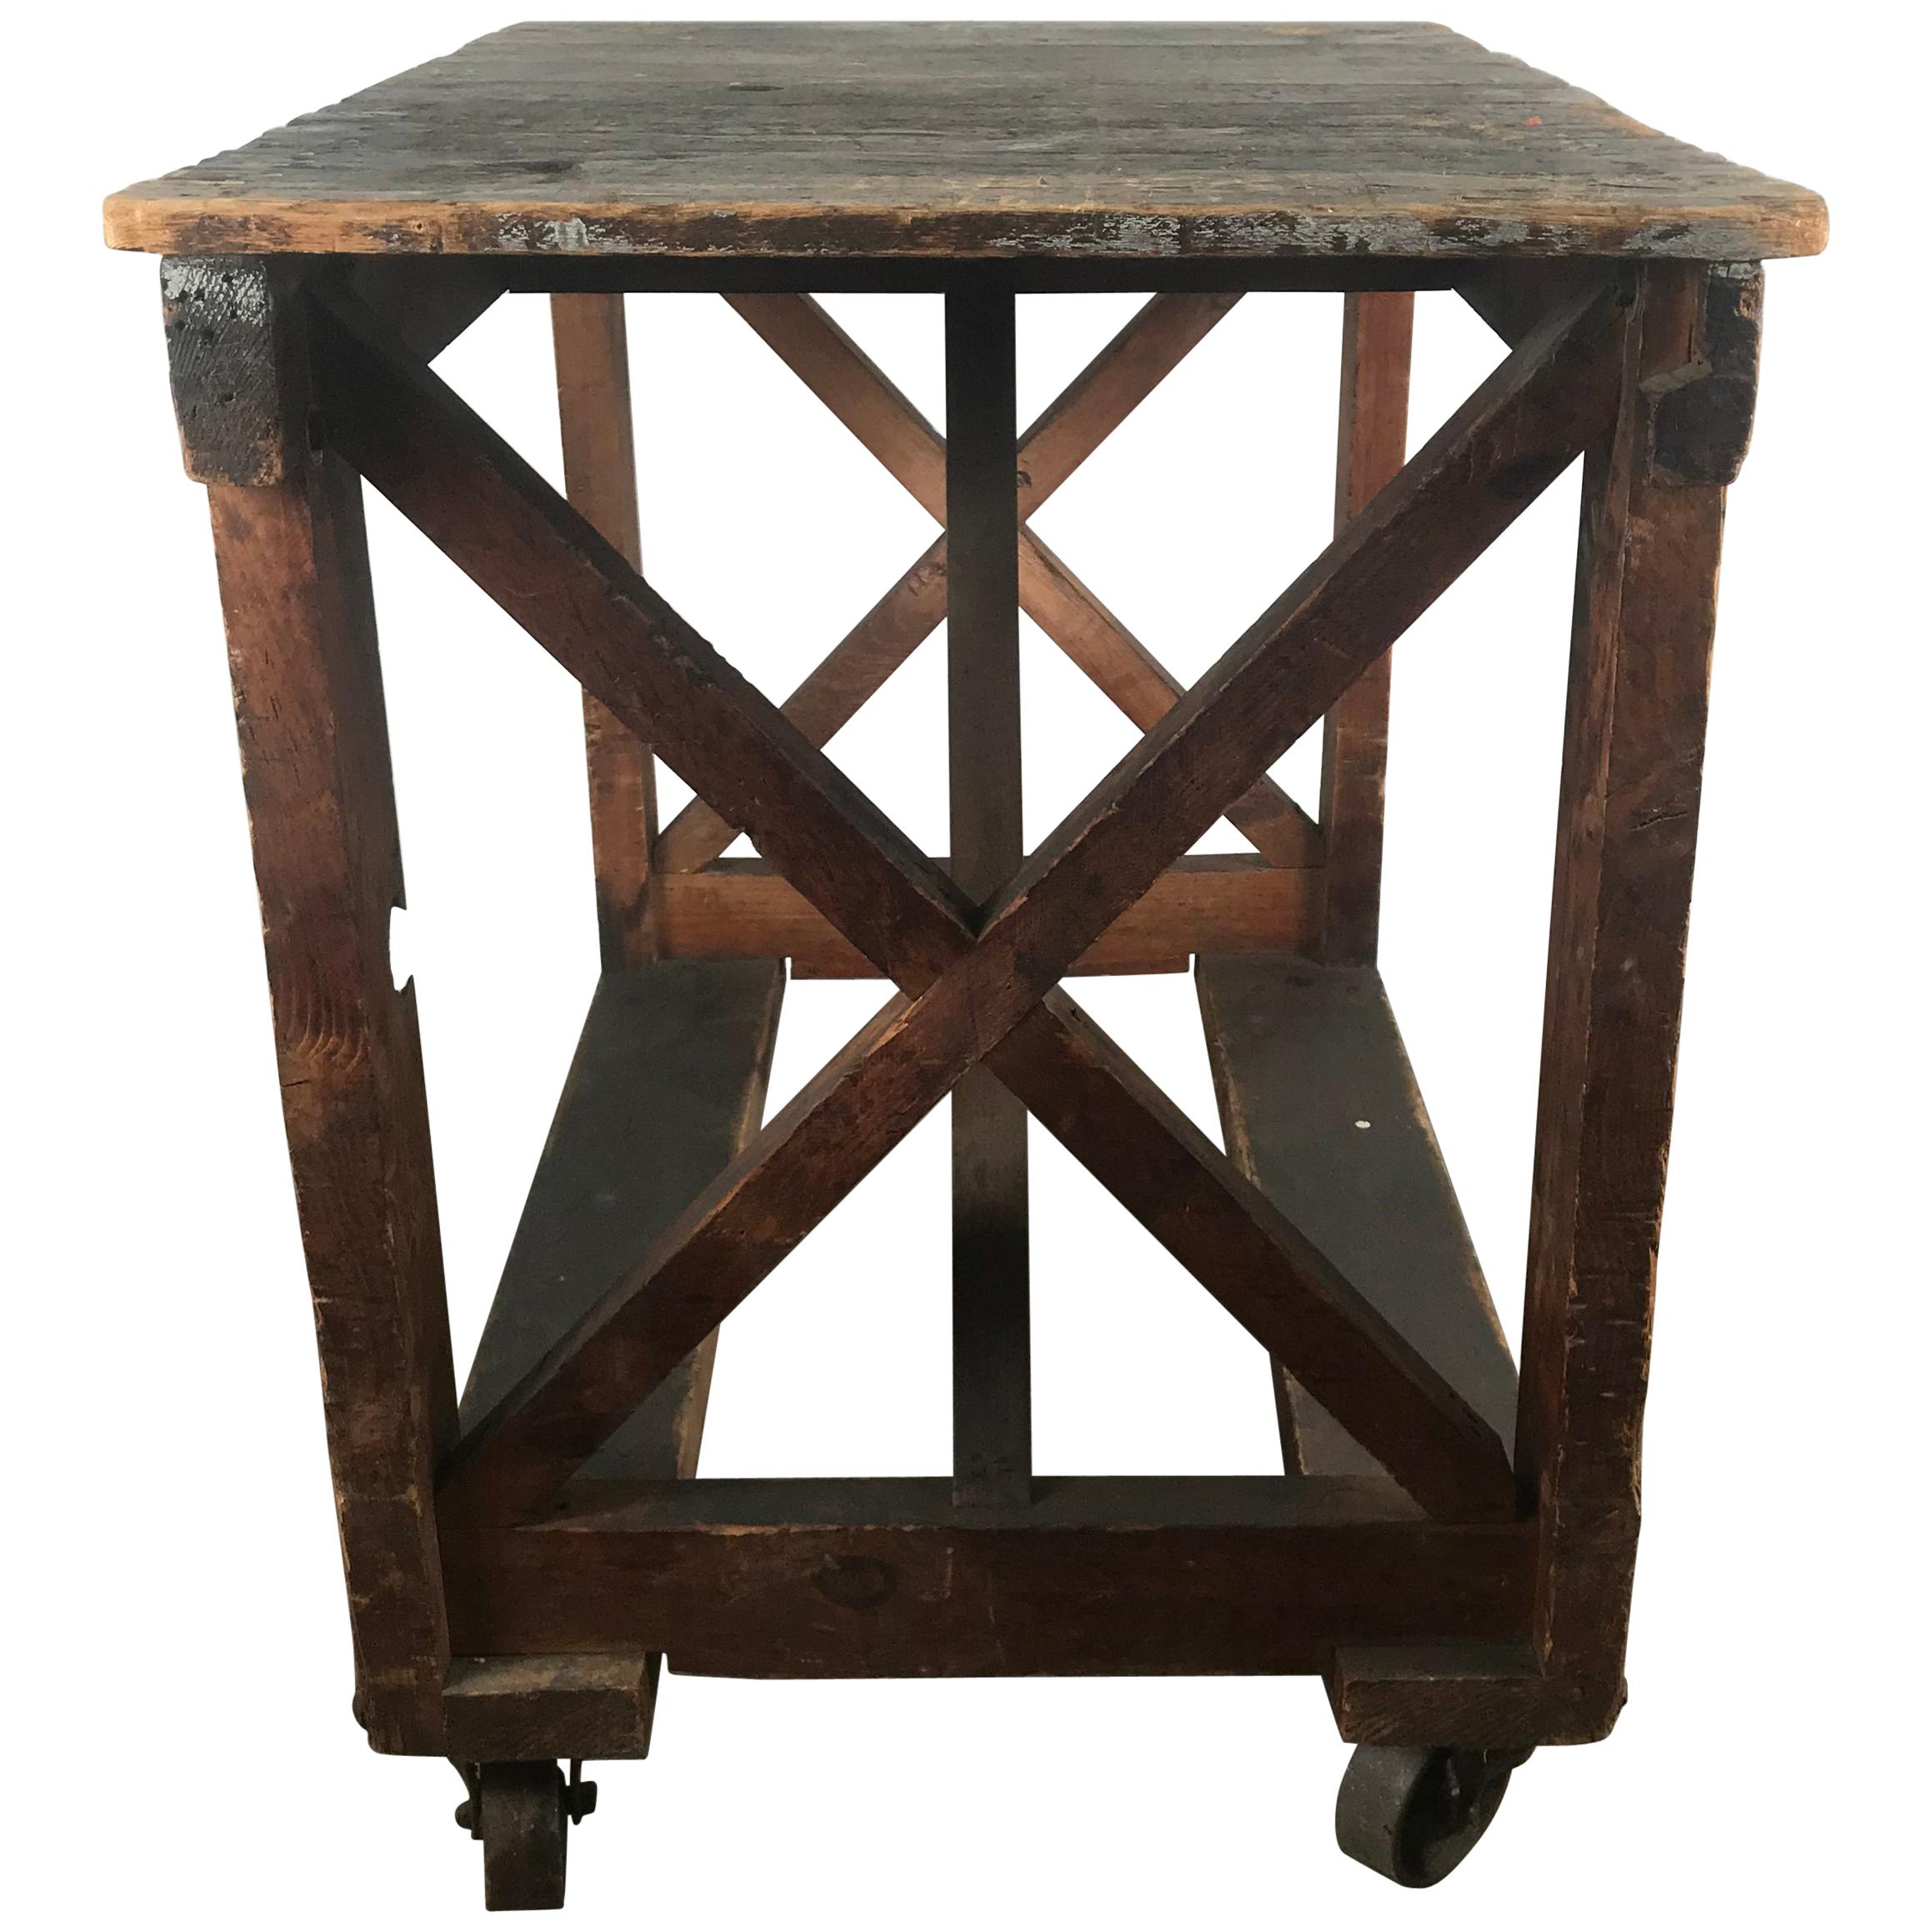 Antique Industrial Factory Work Table on Iron Castors For Sale